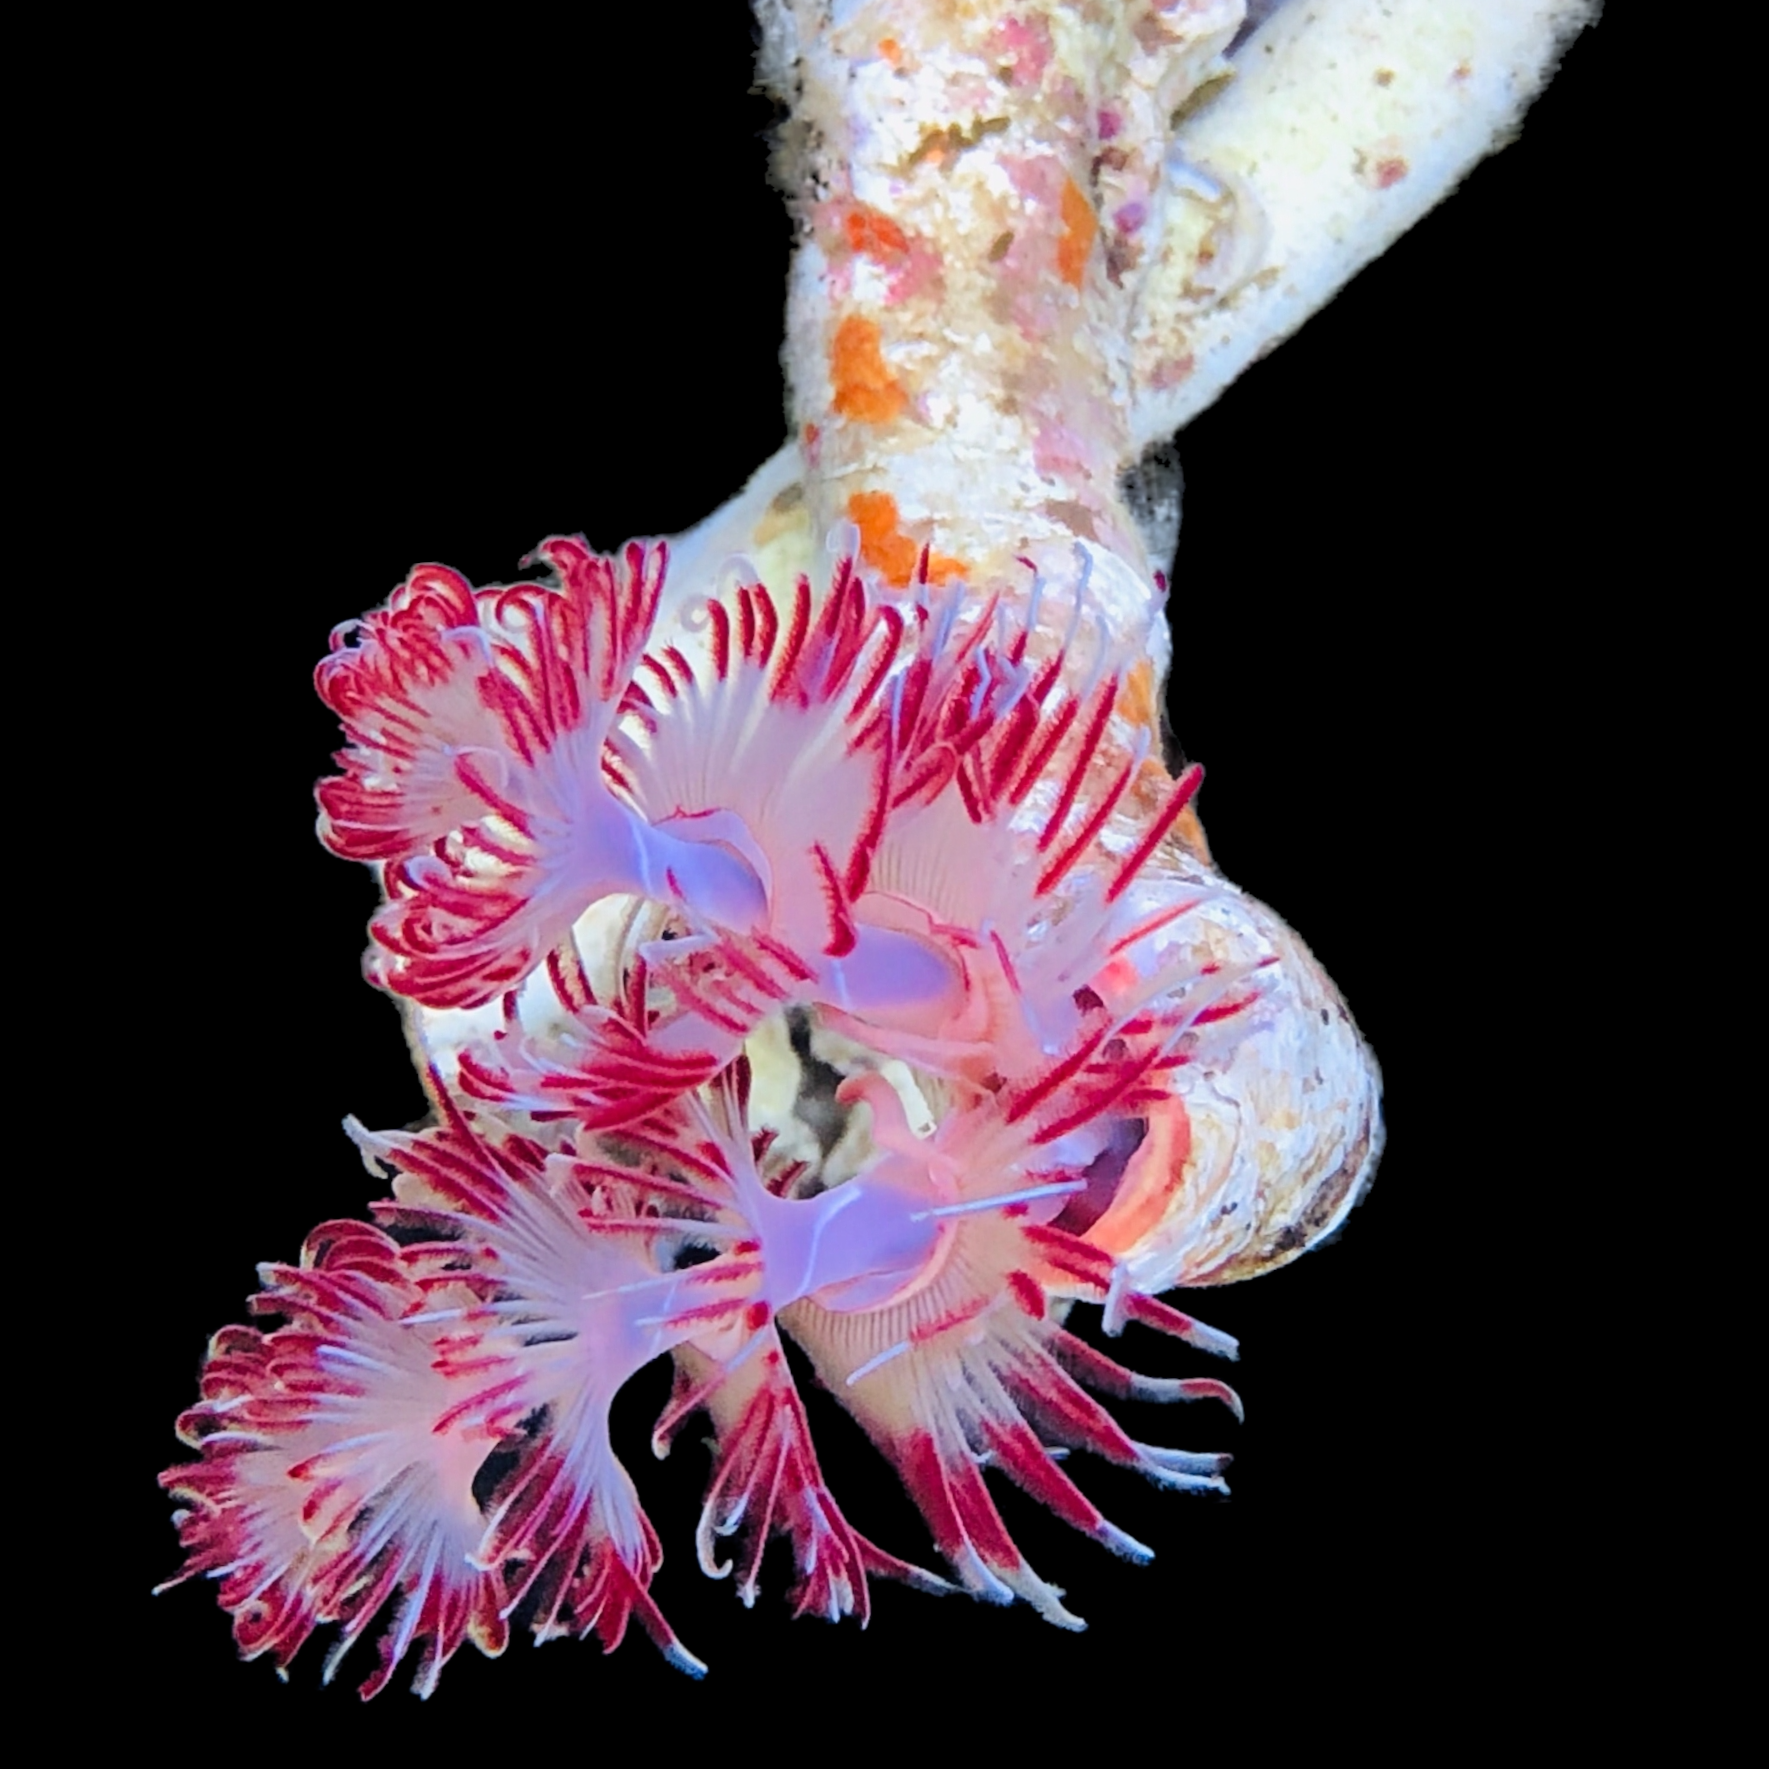 Red Coco Tube Worm (Popular)